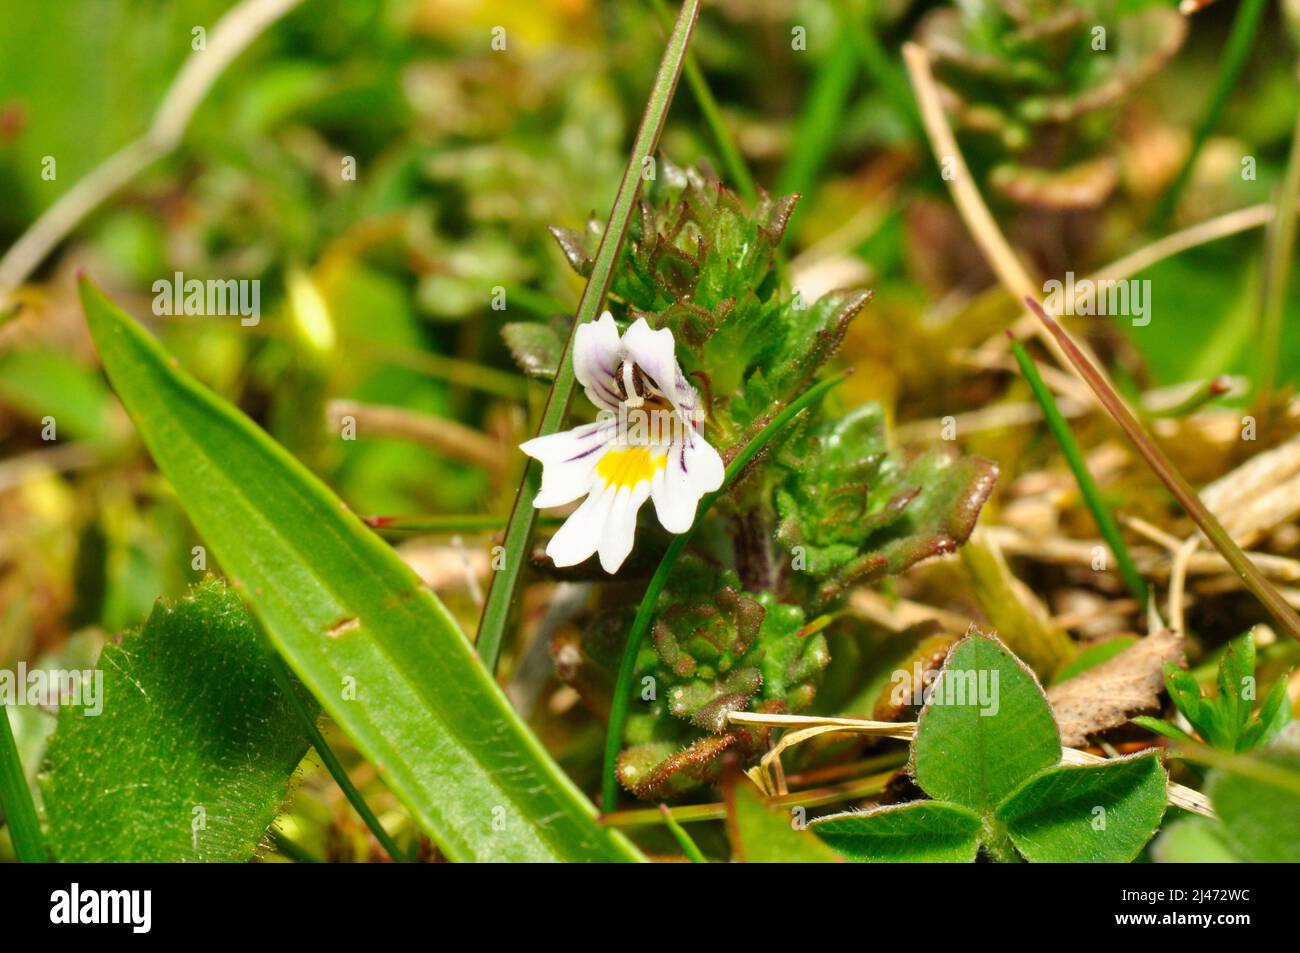 Eyebright, Euphrasia officinalis agg.  Herbaceous flowering plant in the family Orobanchaceae which is semi parasitic on grass and other plants. Small Stock Photo